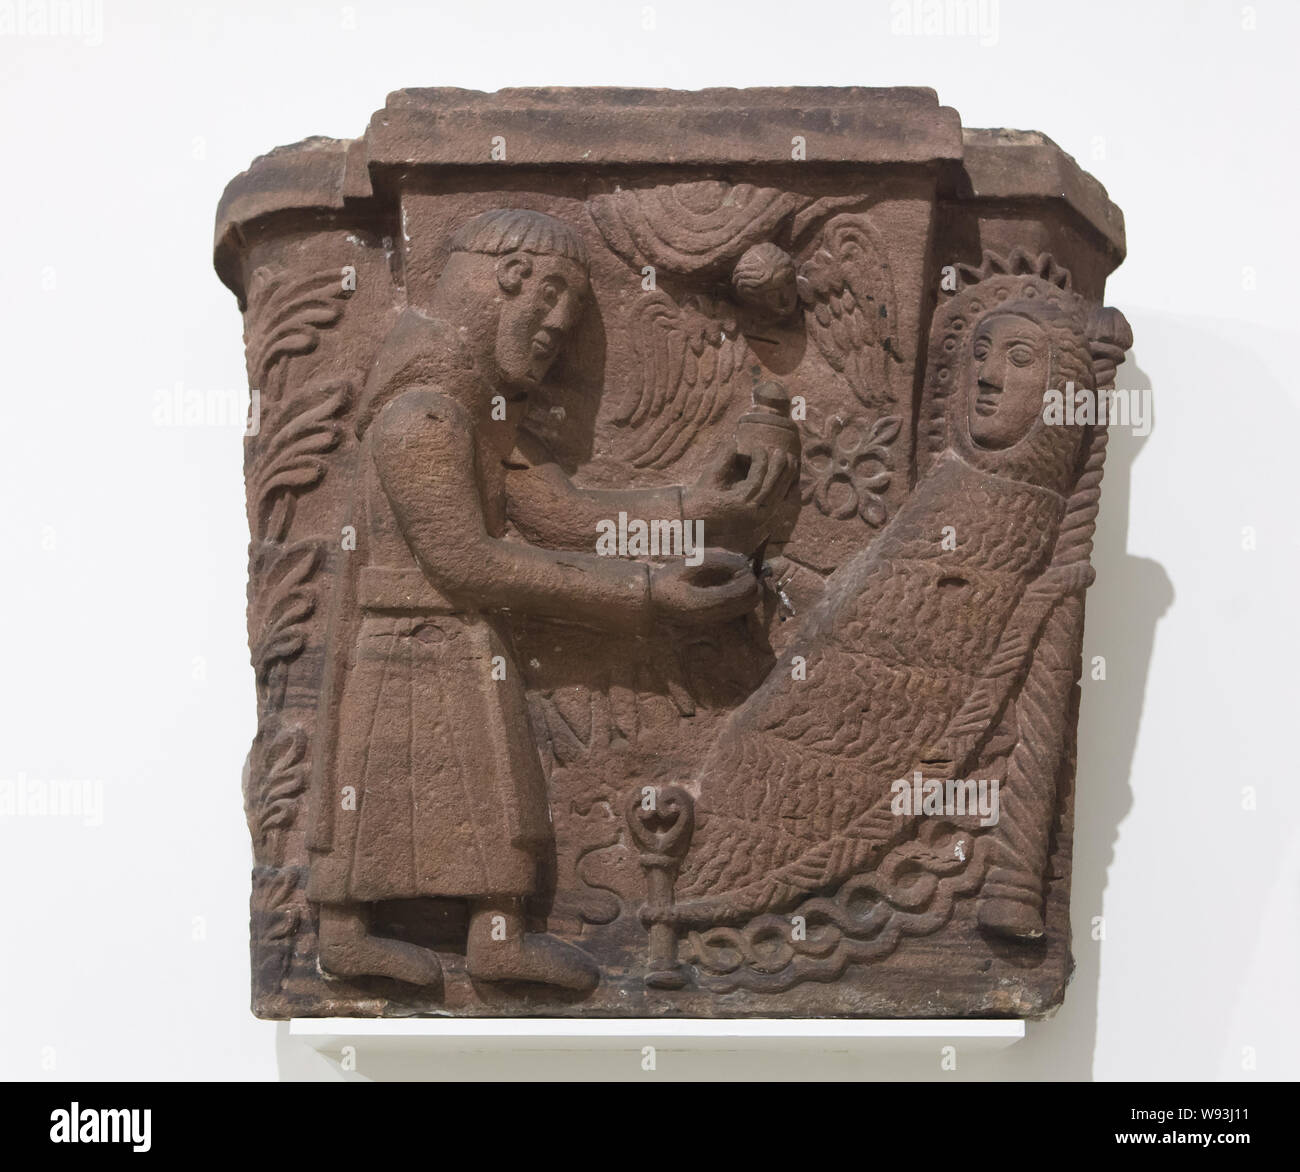 Last Communion of Saint Mary of Egypt. Romanesque capital dated from around 1150 from the Alspach Abbey (Abbaye d'Alspach), now on display in the Unterlinden Museum (Musée Unterlinden) in Colmar, Alsace, France. Stock Photo